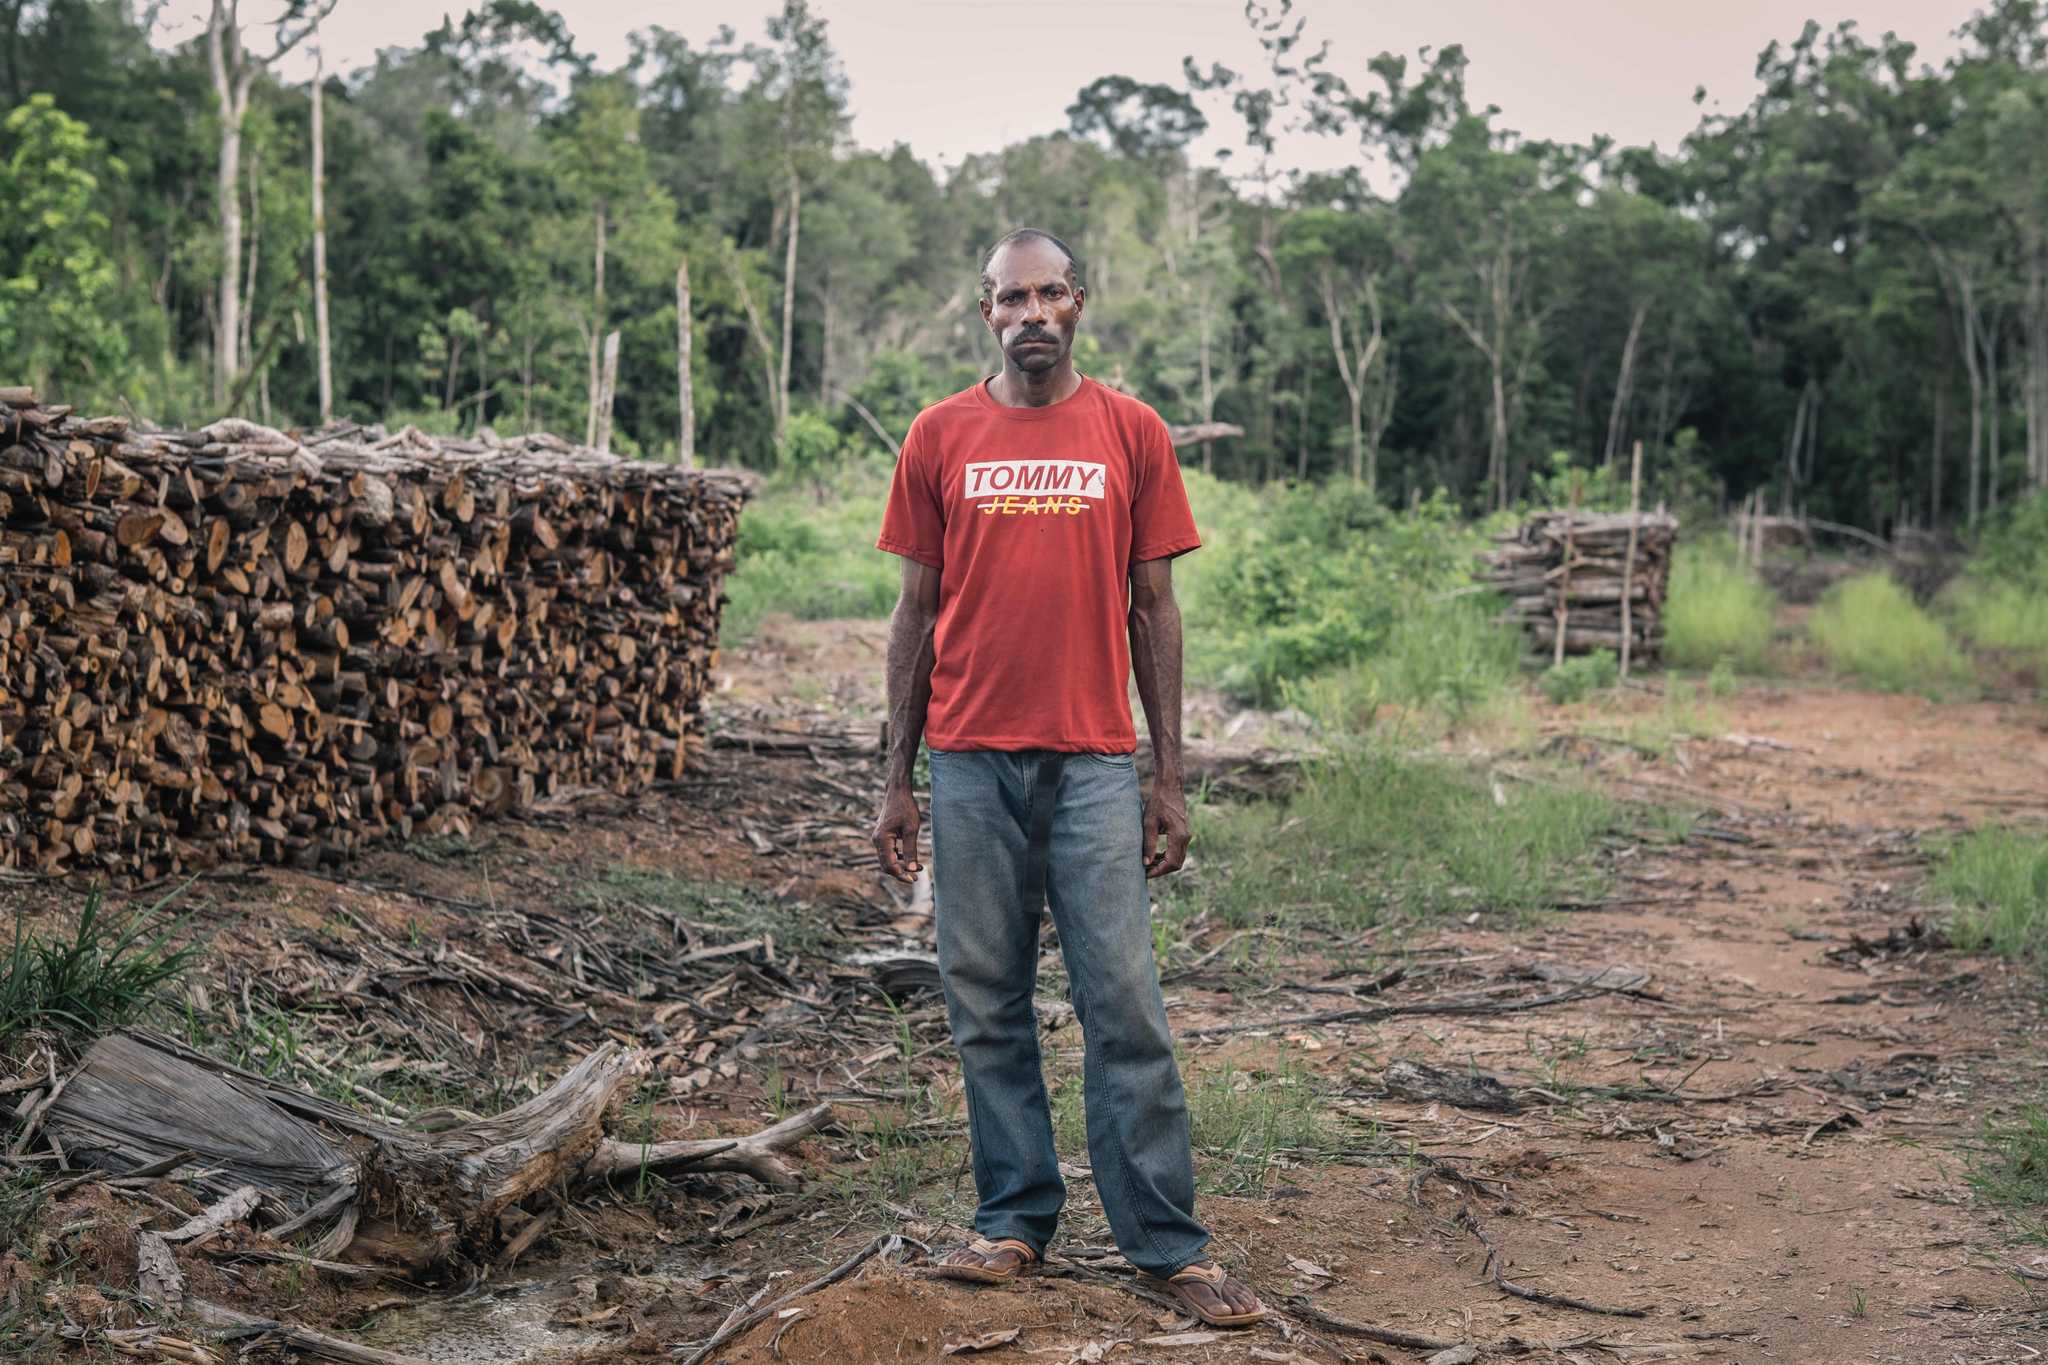 Felix Balagaize works as a leles contractor. Medco pays him 85,000 rupiah for each cubic metre of wood gathered. He organises villagers to undertake the work and pays them, in turn, 70,000 rupiah for each cubic metre. Felix also provides staple food in advance, deducting the costs from his payments to villagers.